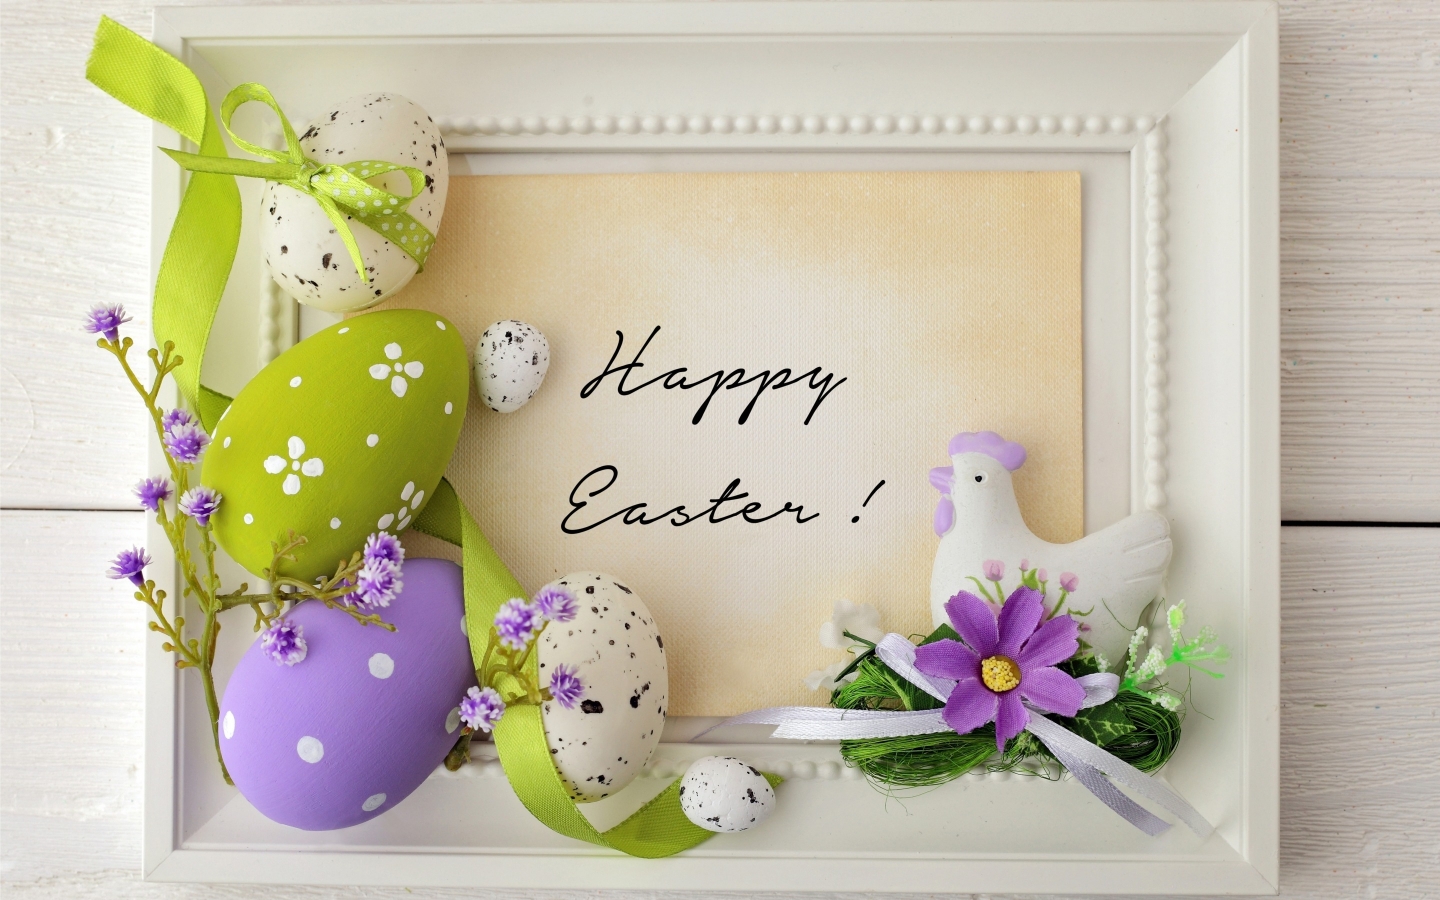 300+] Easter Wallpapers | Wallpapers.com